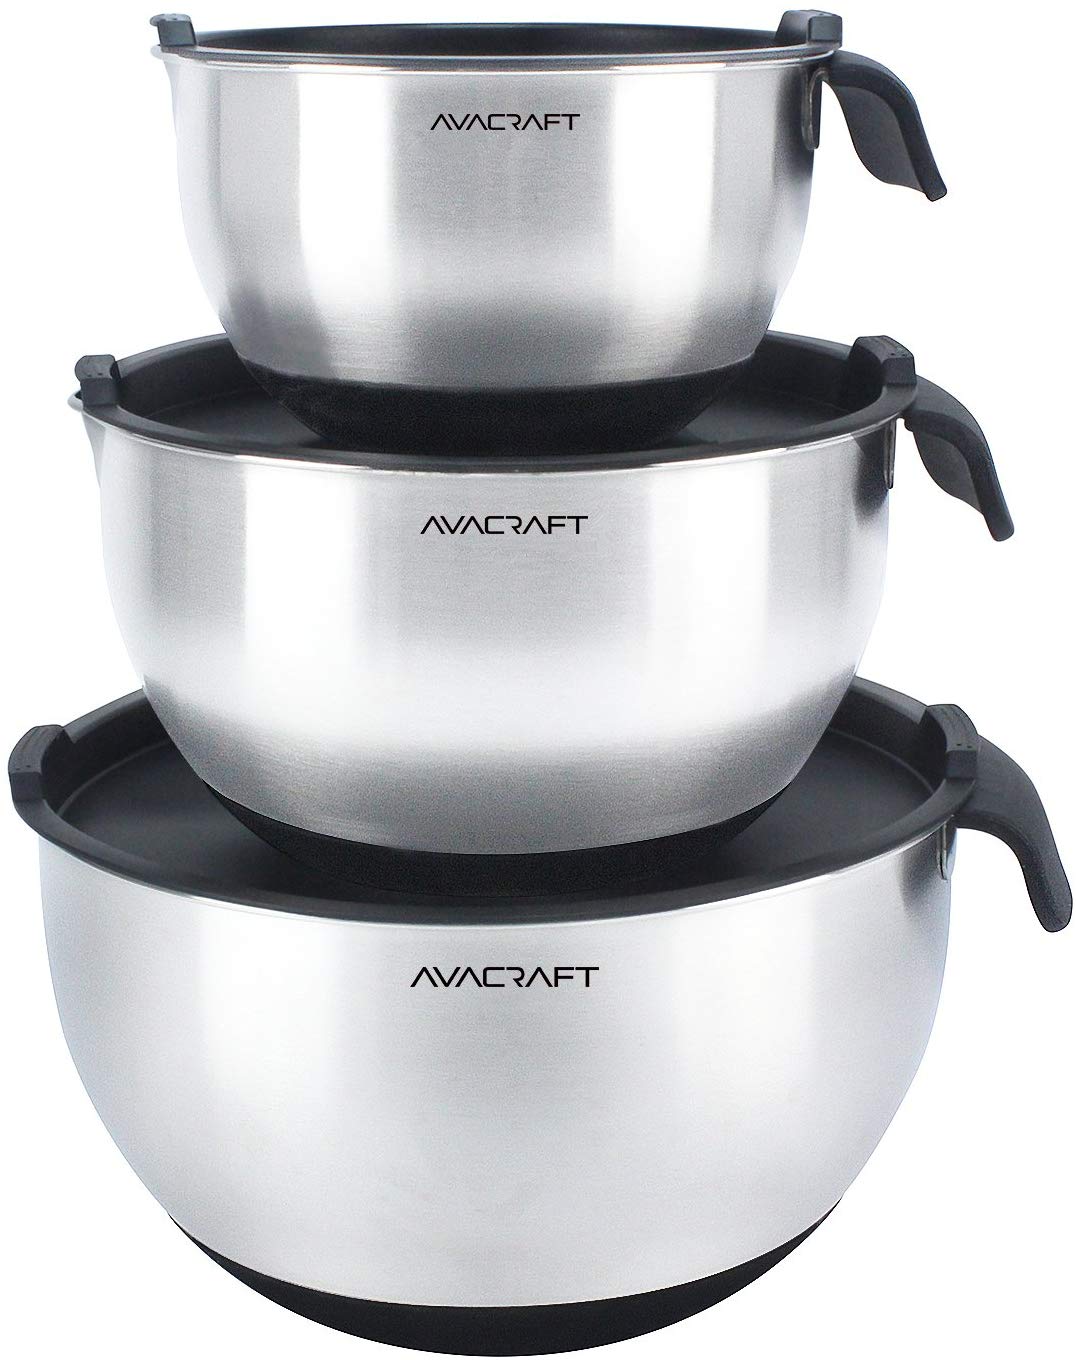 AVACRAFT Nesting Spouted Mixing Bowl Set, 3-Piece